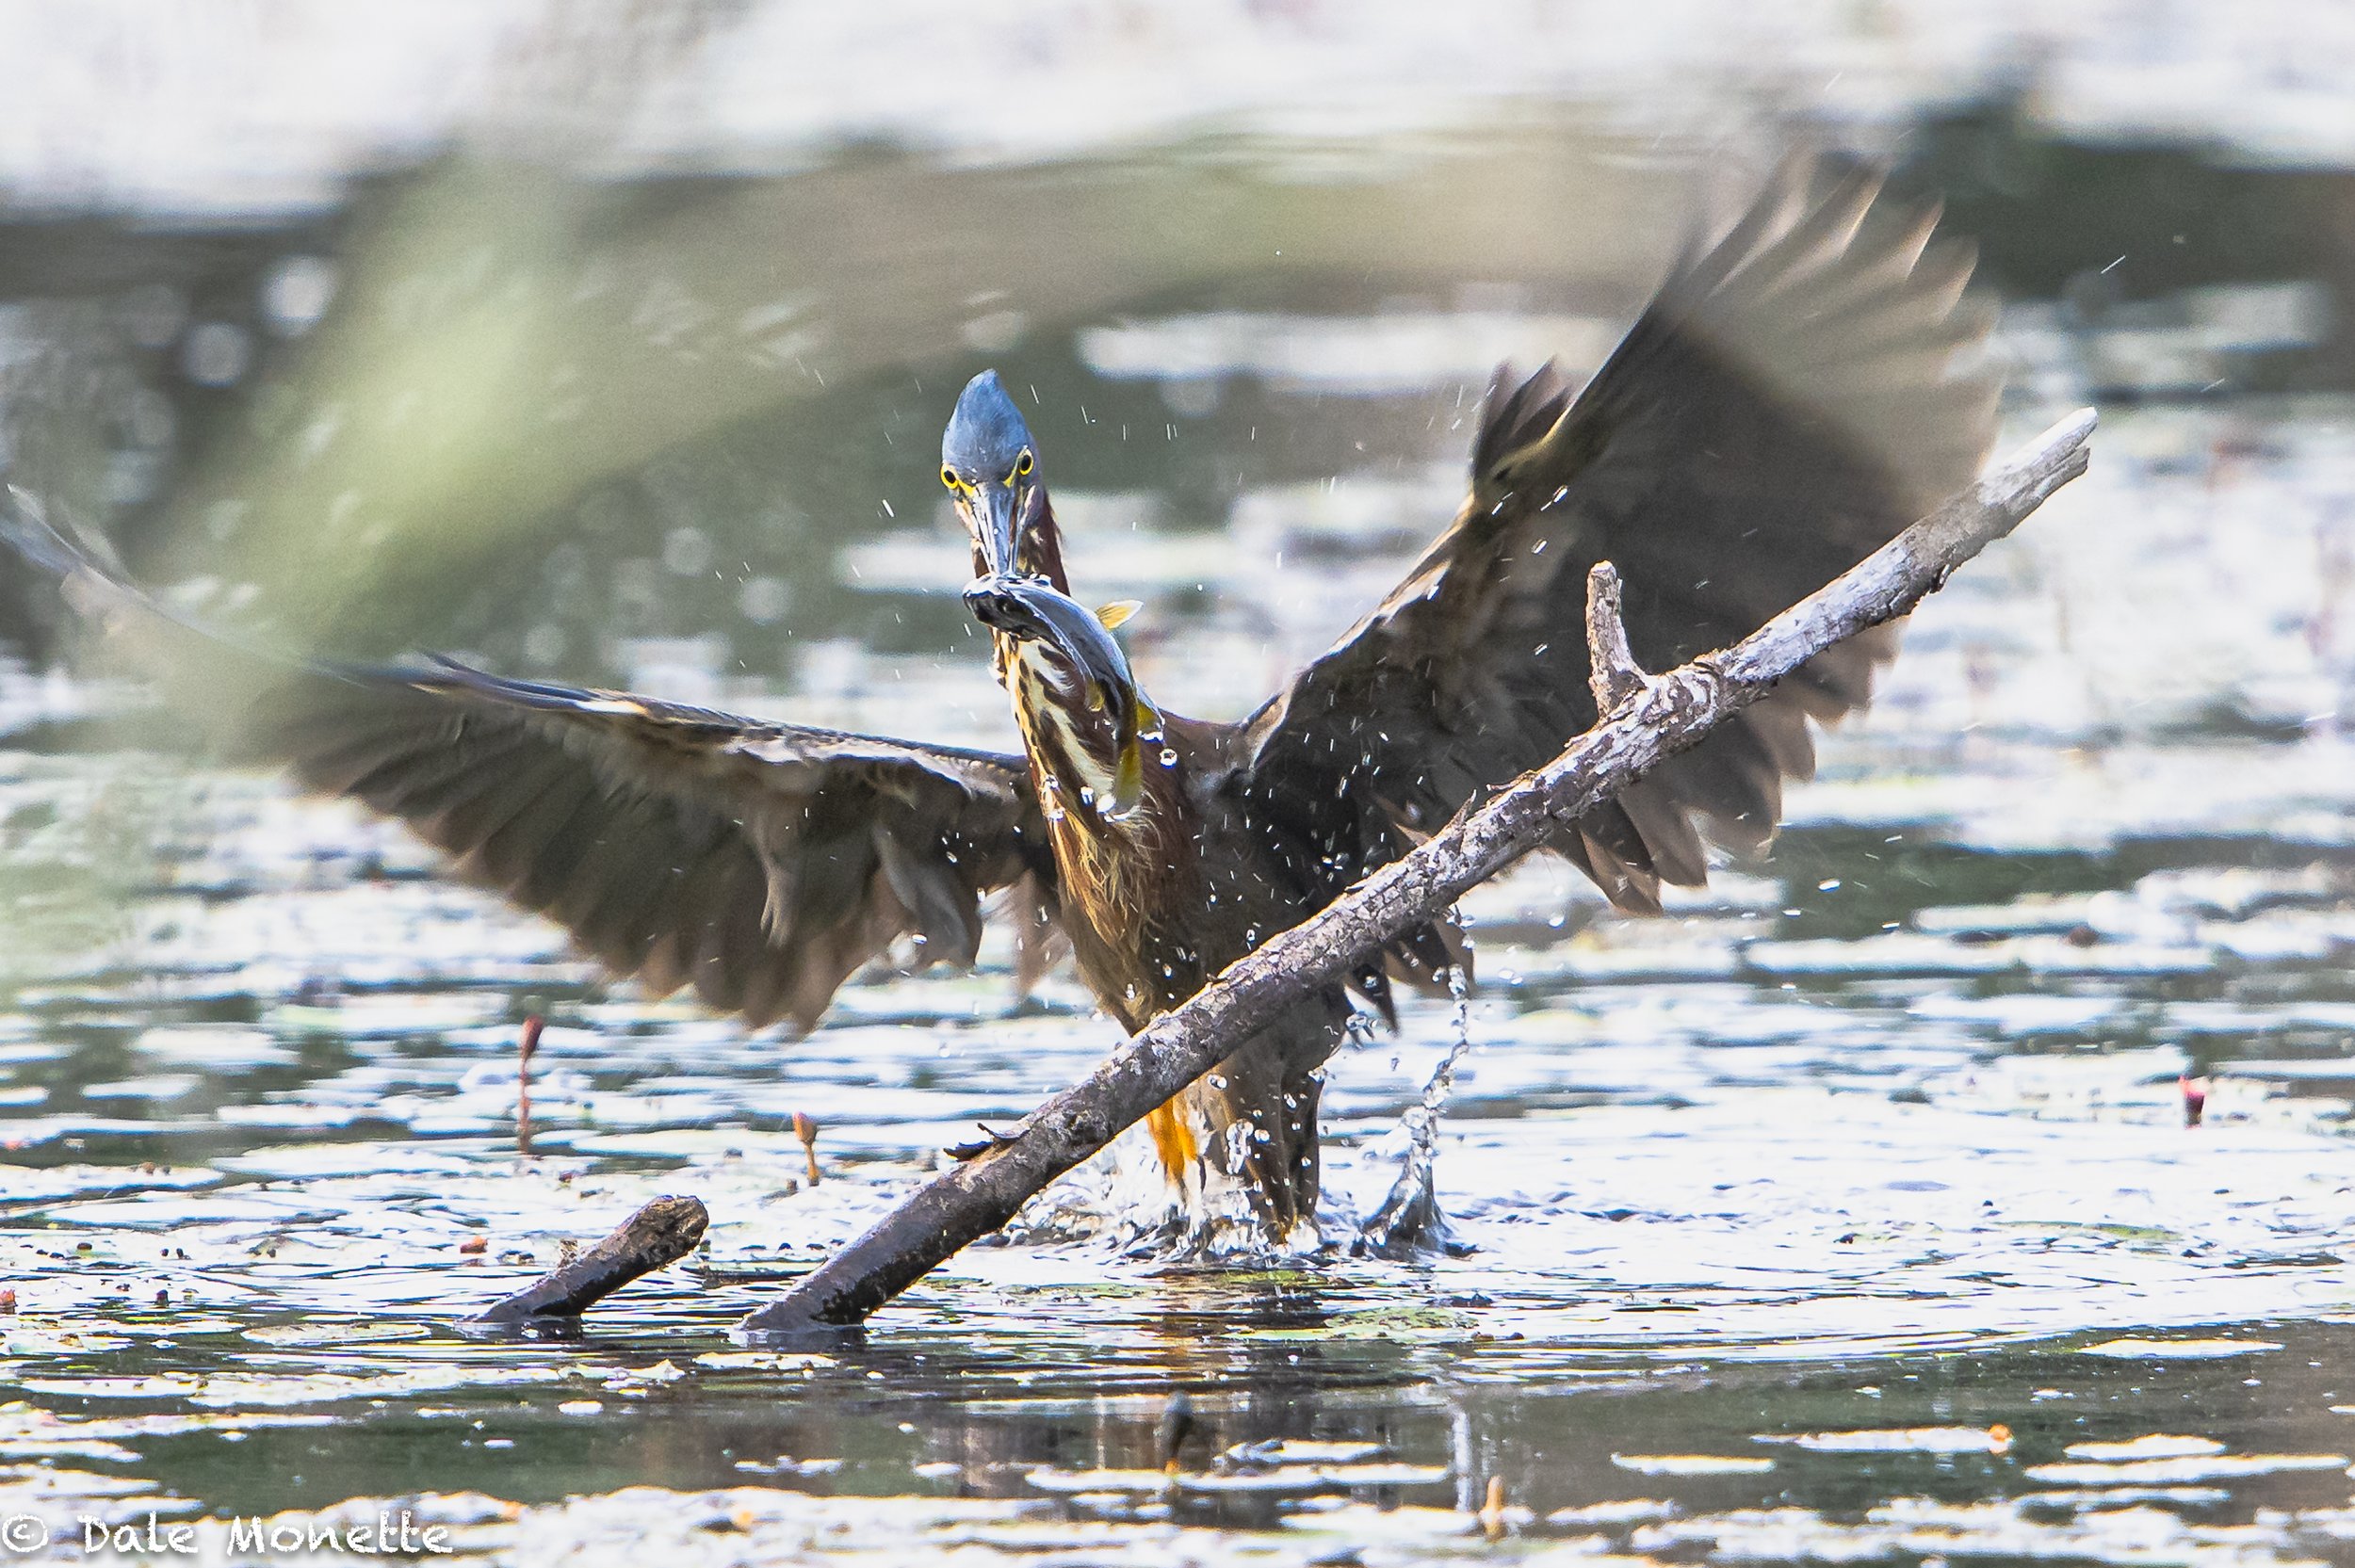   I dont usually think about technical stuff when taking a photo. It happens so fast sometimes I just point the camera in the right direction and hope for the best. Green heron with a sunfish for lunch.  